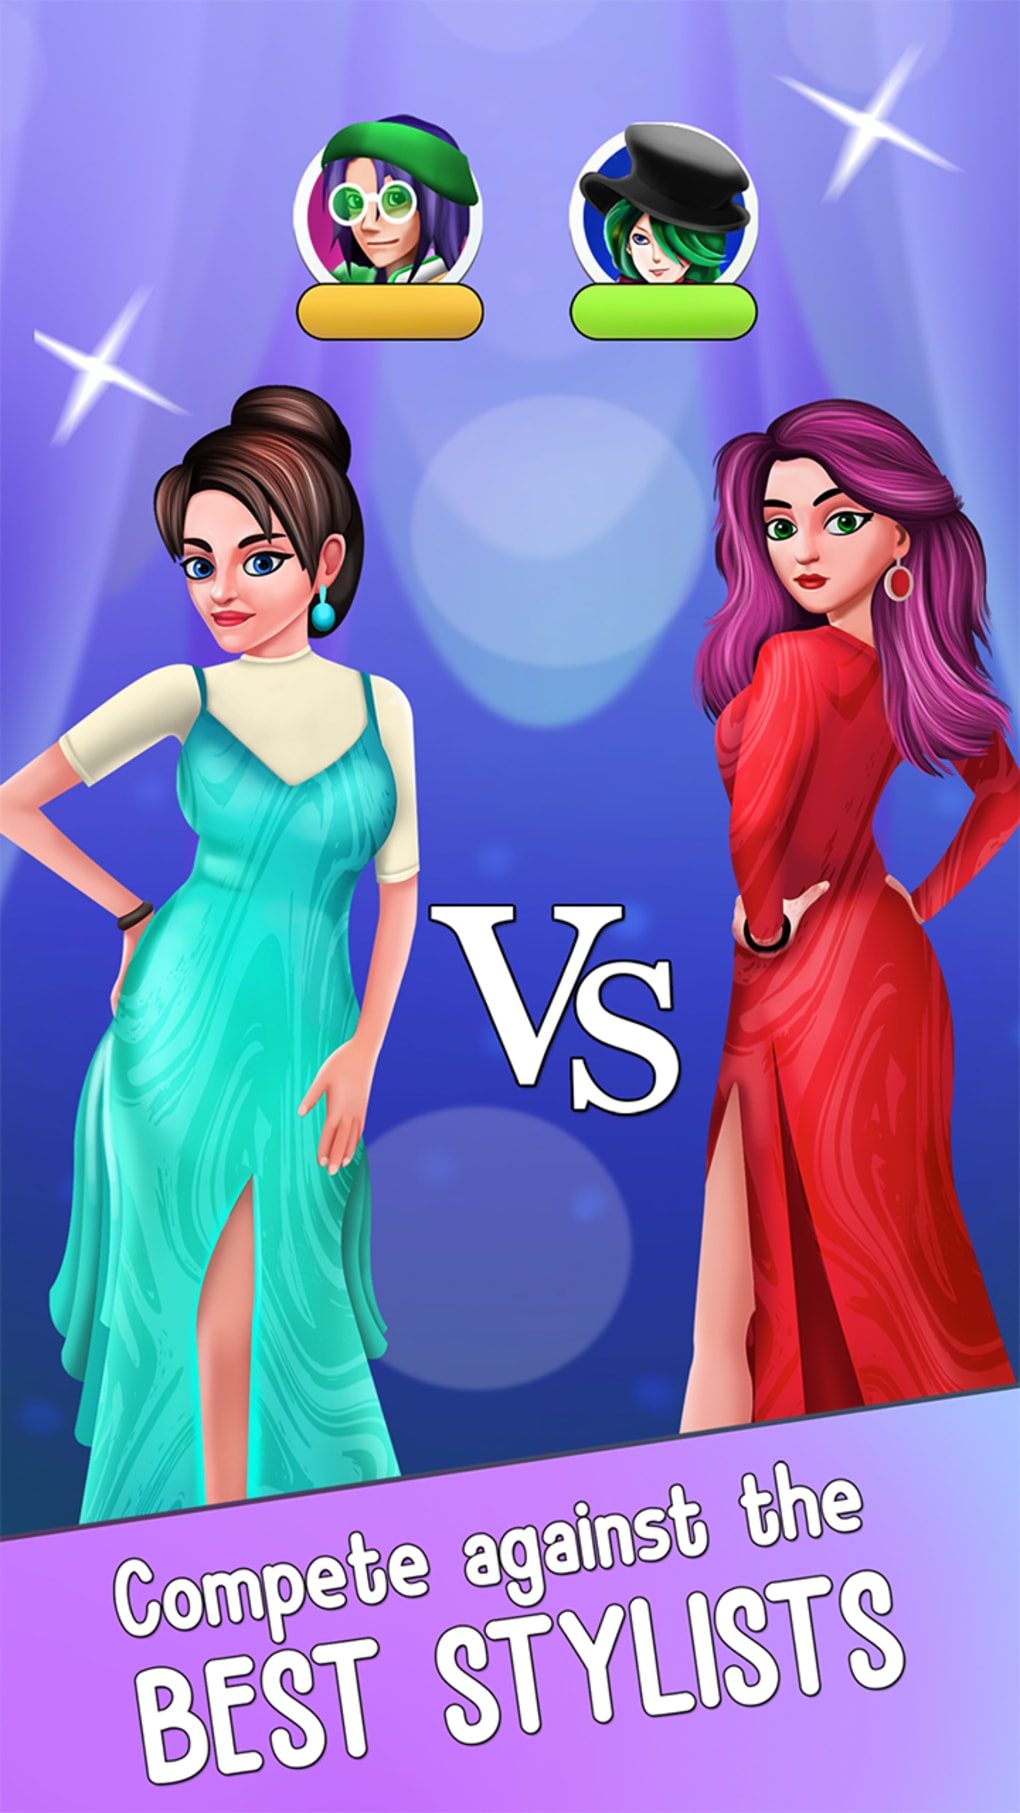 The best dress up games on mobile